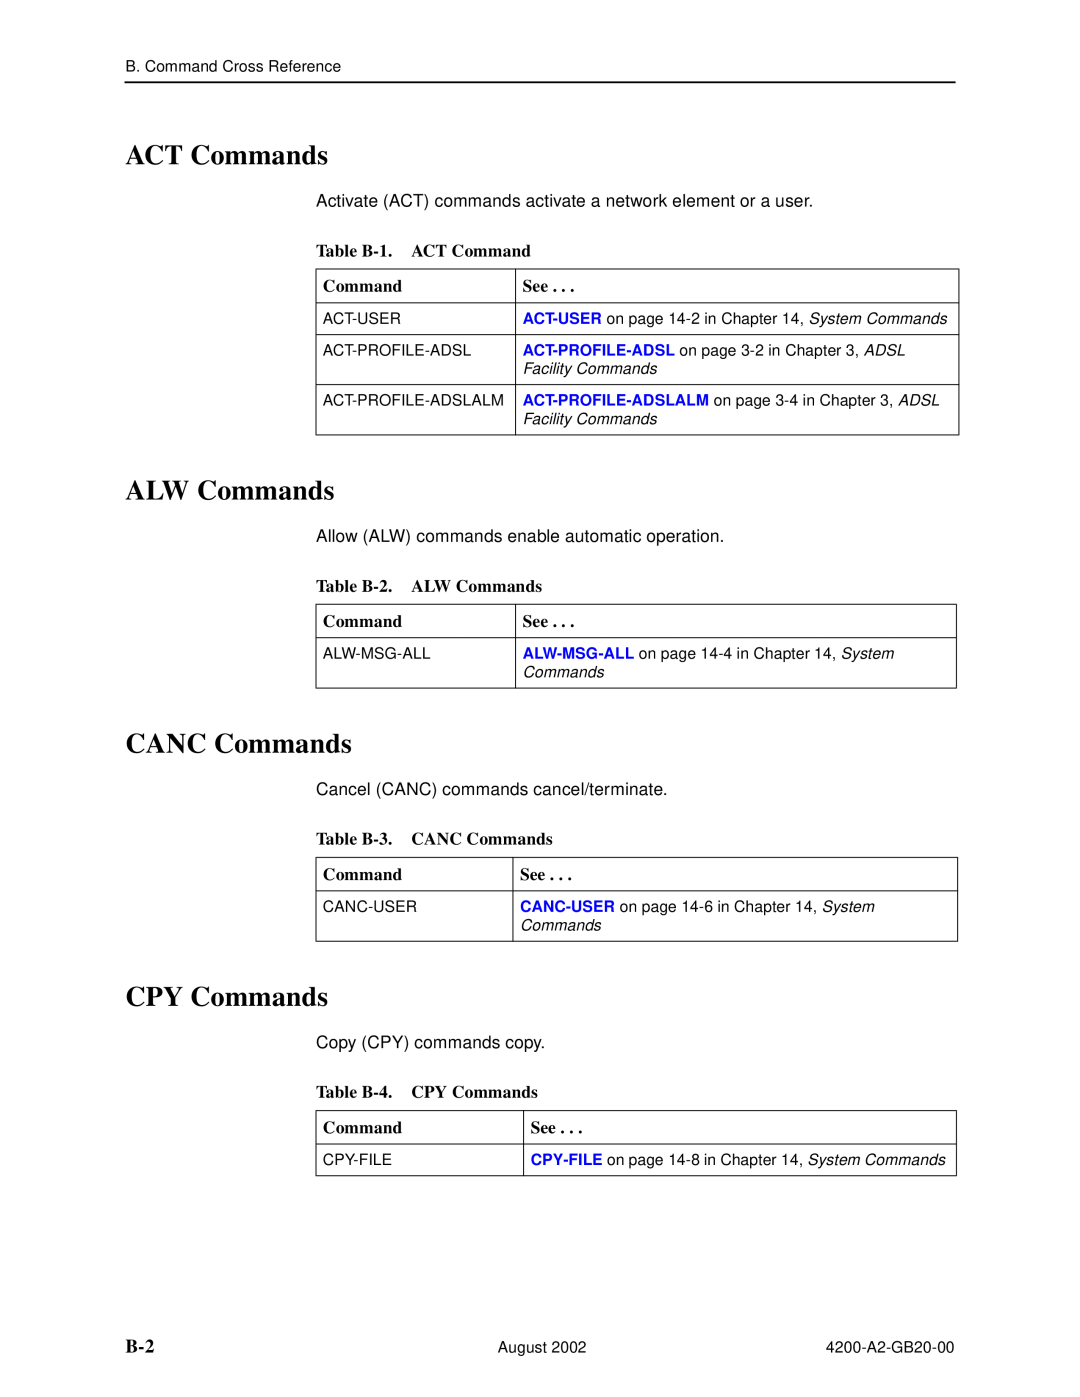 Paradyne 4200 manual ACT Commands, CANC Commands, CPY Commands, Table B-1. ACT Command, Table B-2. ALW Commands 